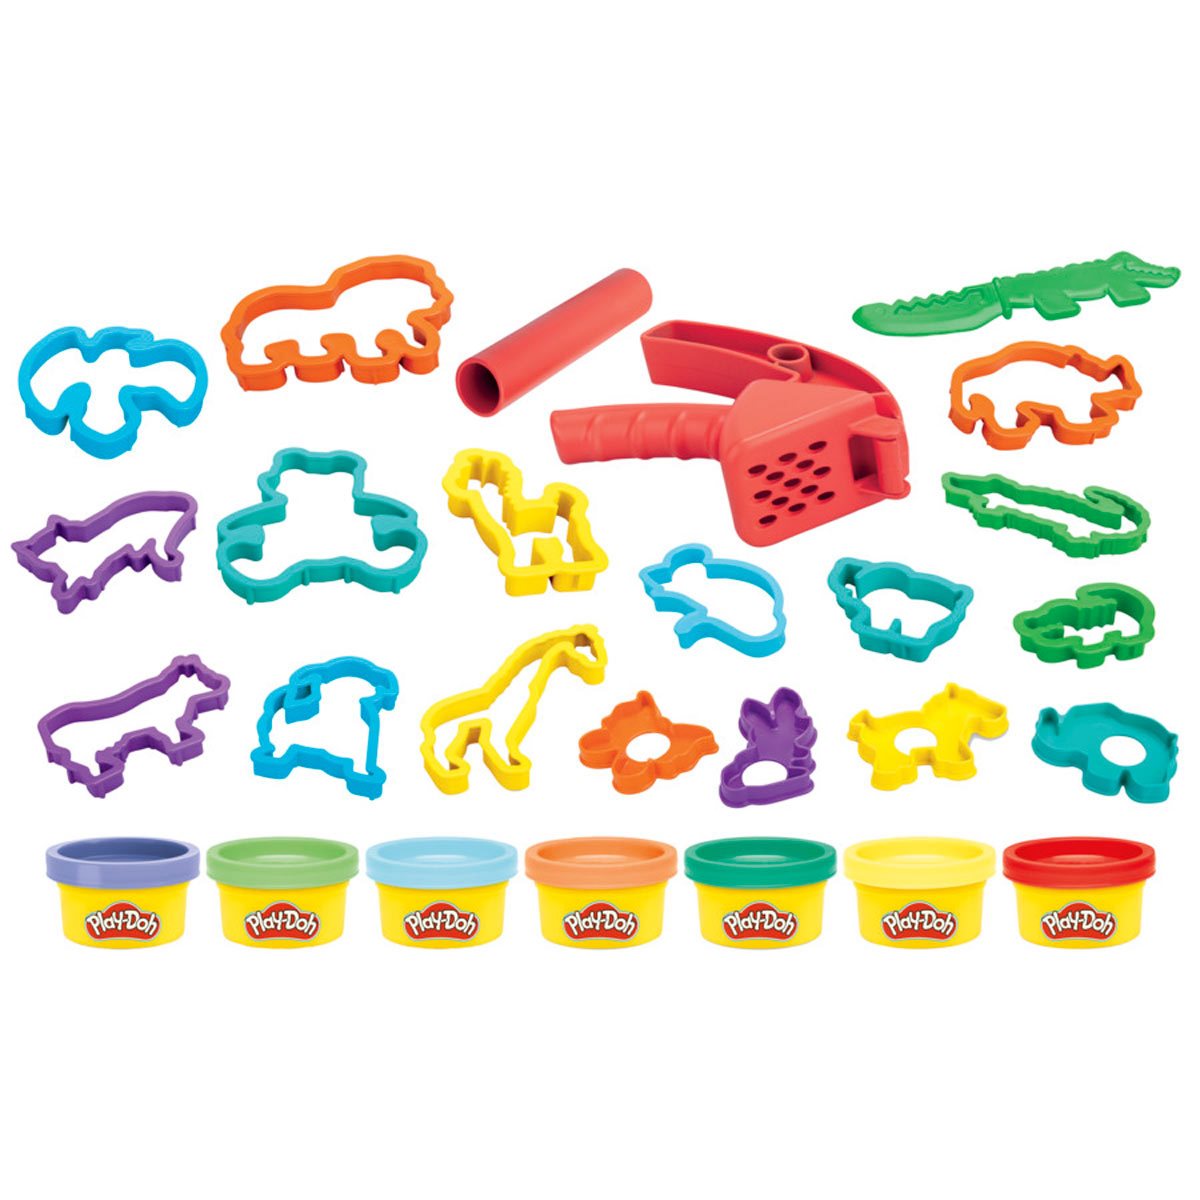 Play-Doh Case of Imagination  Play doh, Creative toys for kids, Creative  toy